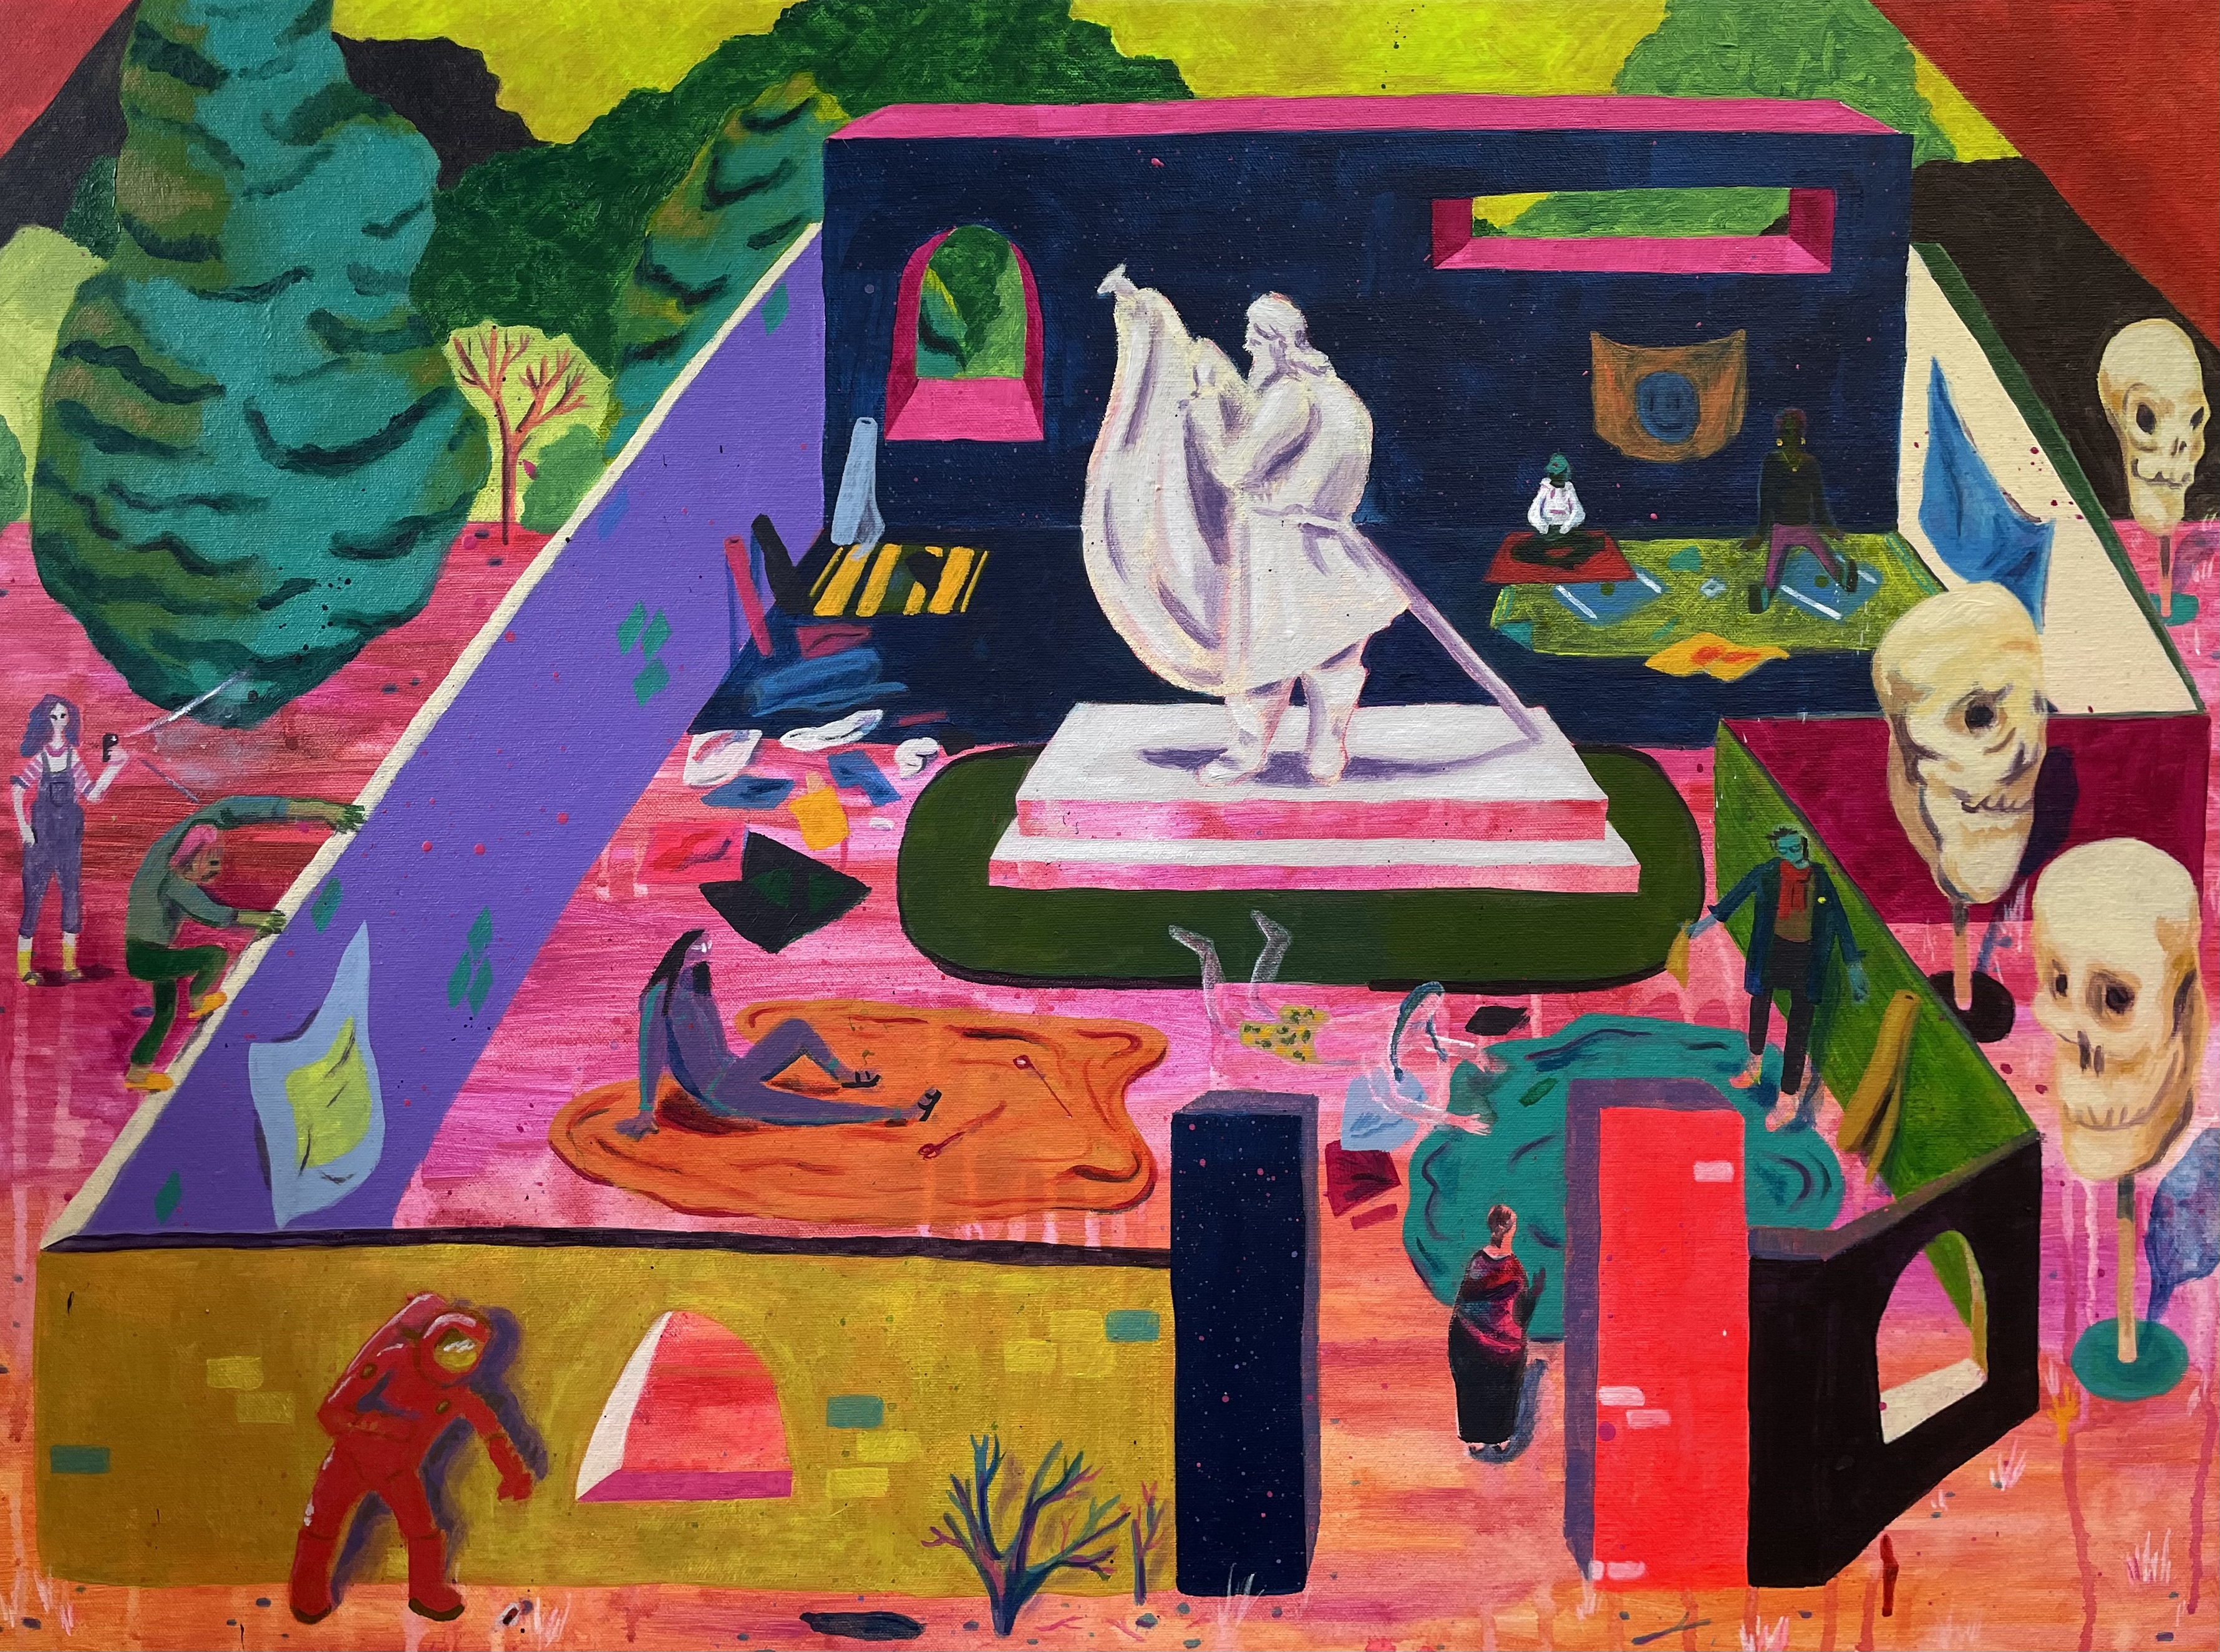 A painting of several figures in a fantastical colourful landscape, who appear to be making flags using fabric pieces.